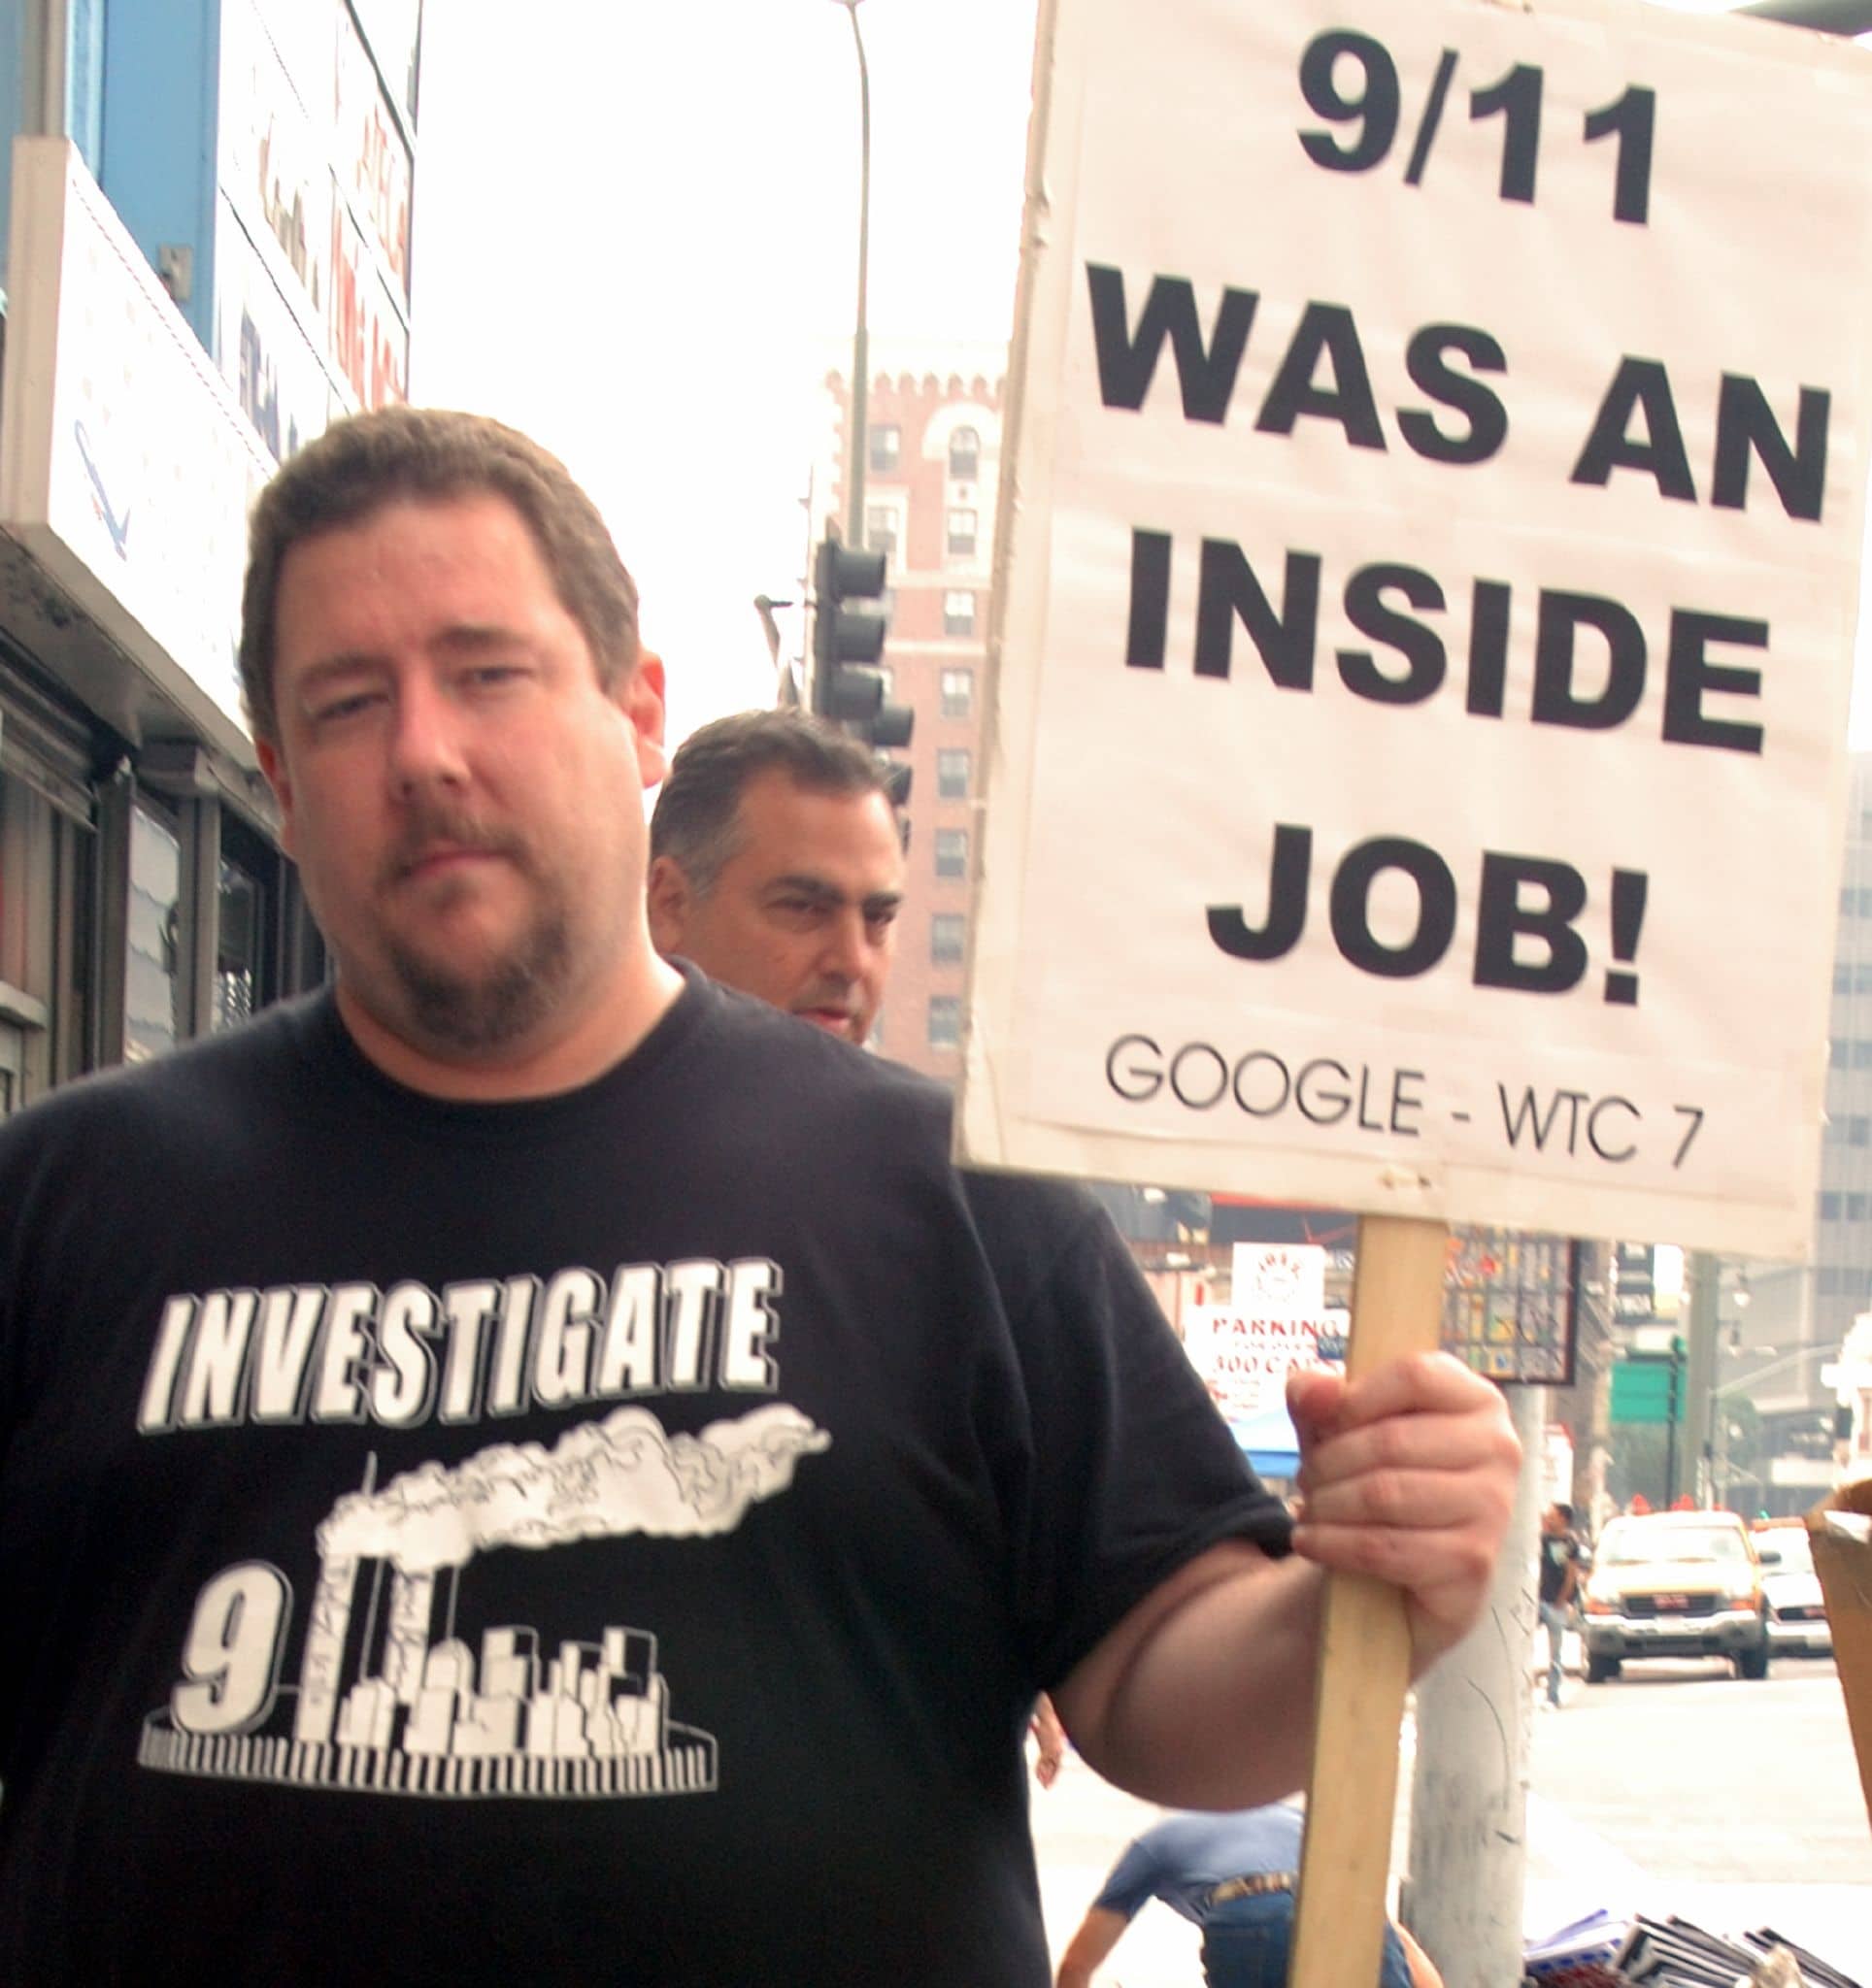 9/11 Truth Movement demonstrator, Los Angeles. Date: 28 October 2007. Source: 9/11 Was an Inside Job. Author: Damon D'Amato from North Hollywood, Calfornia. (CC BY 2.0)